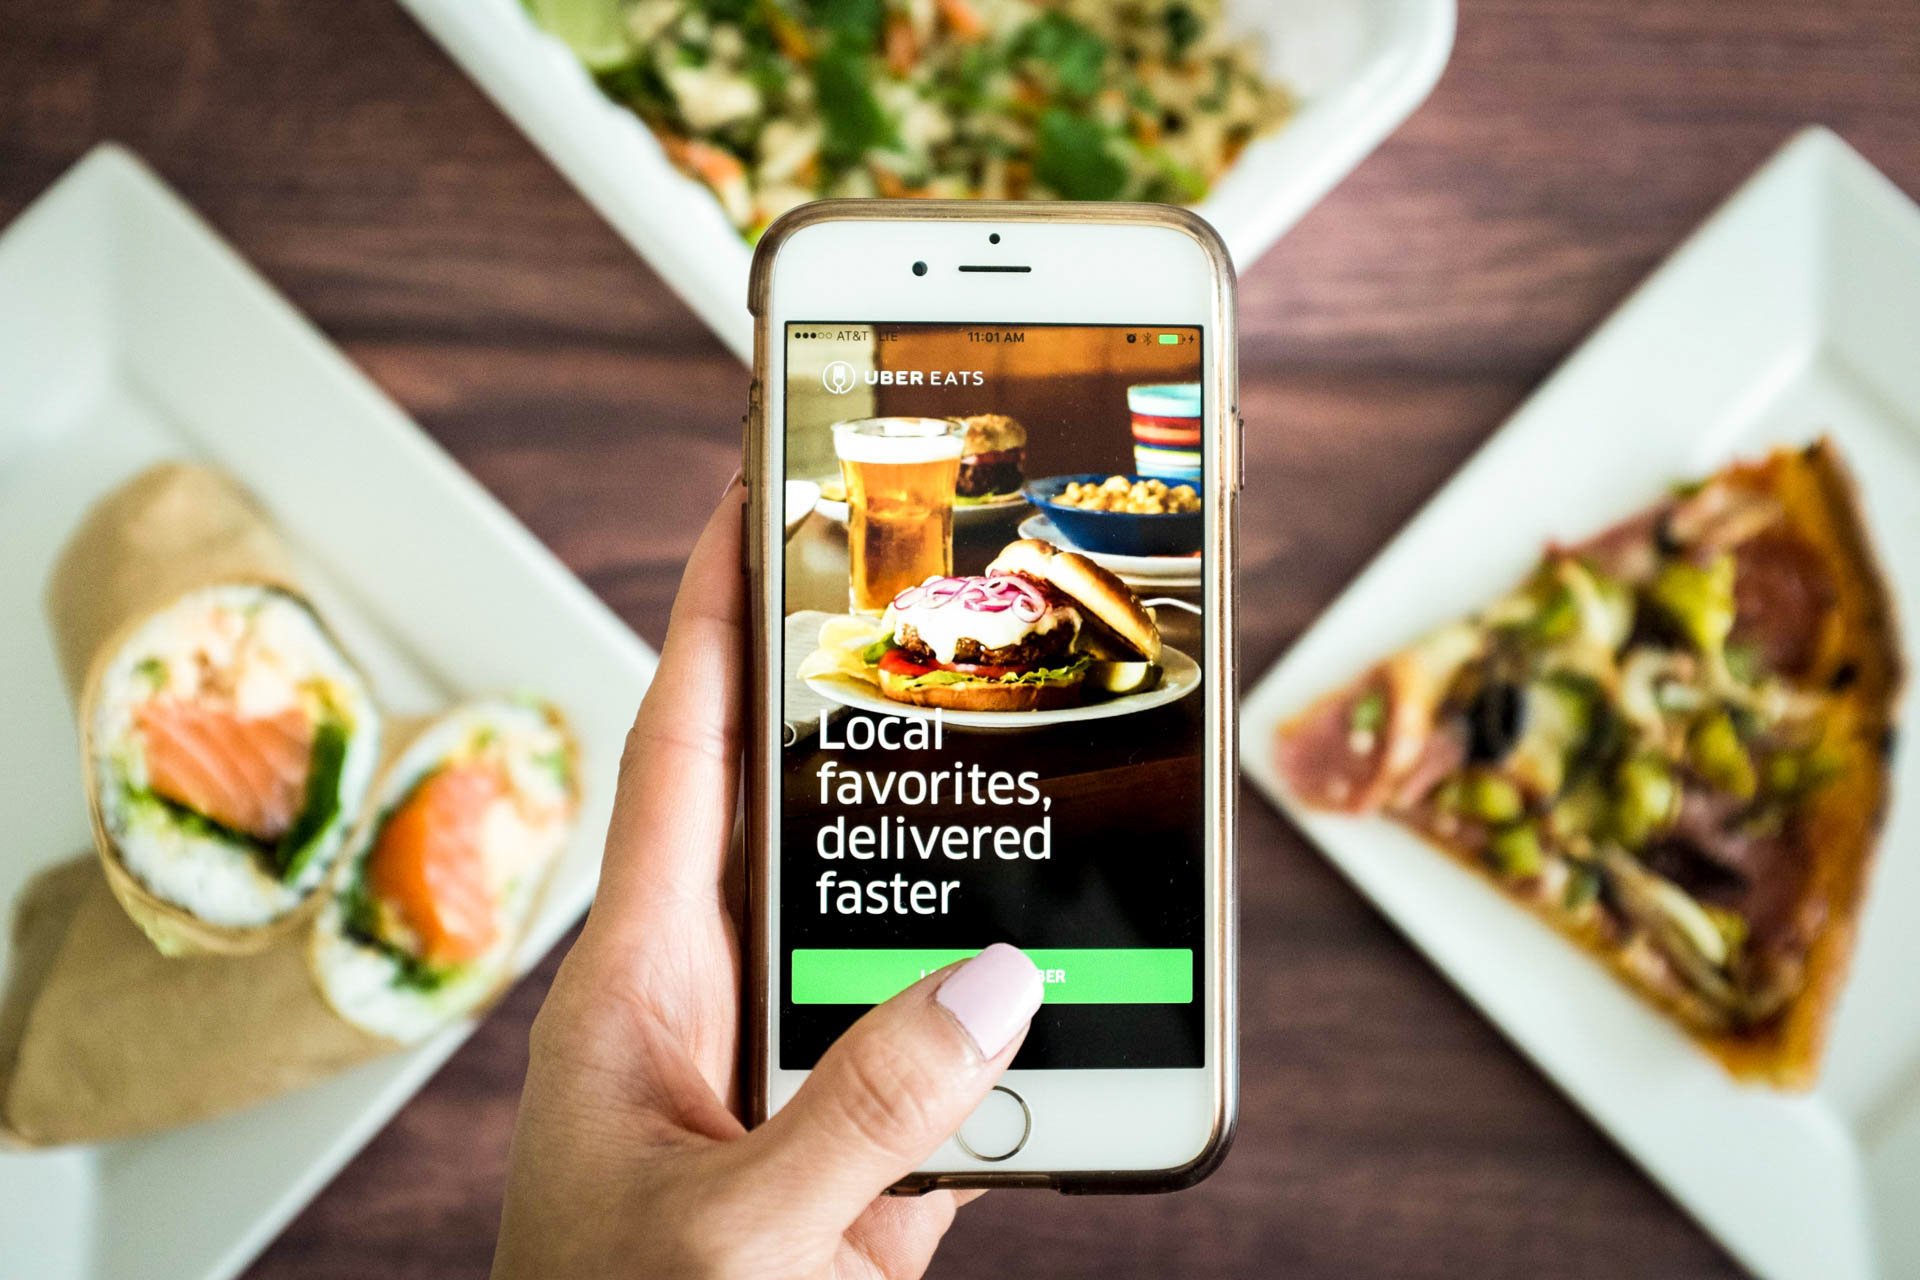 Uber Eats becomes London’s first 24/7 food delivery app | London